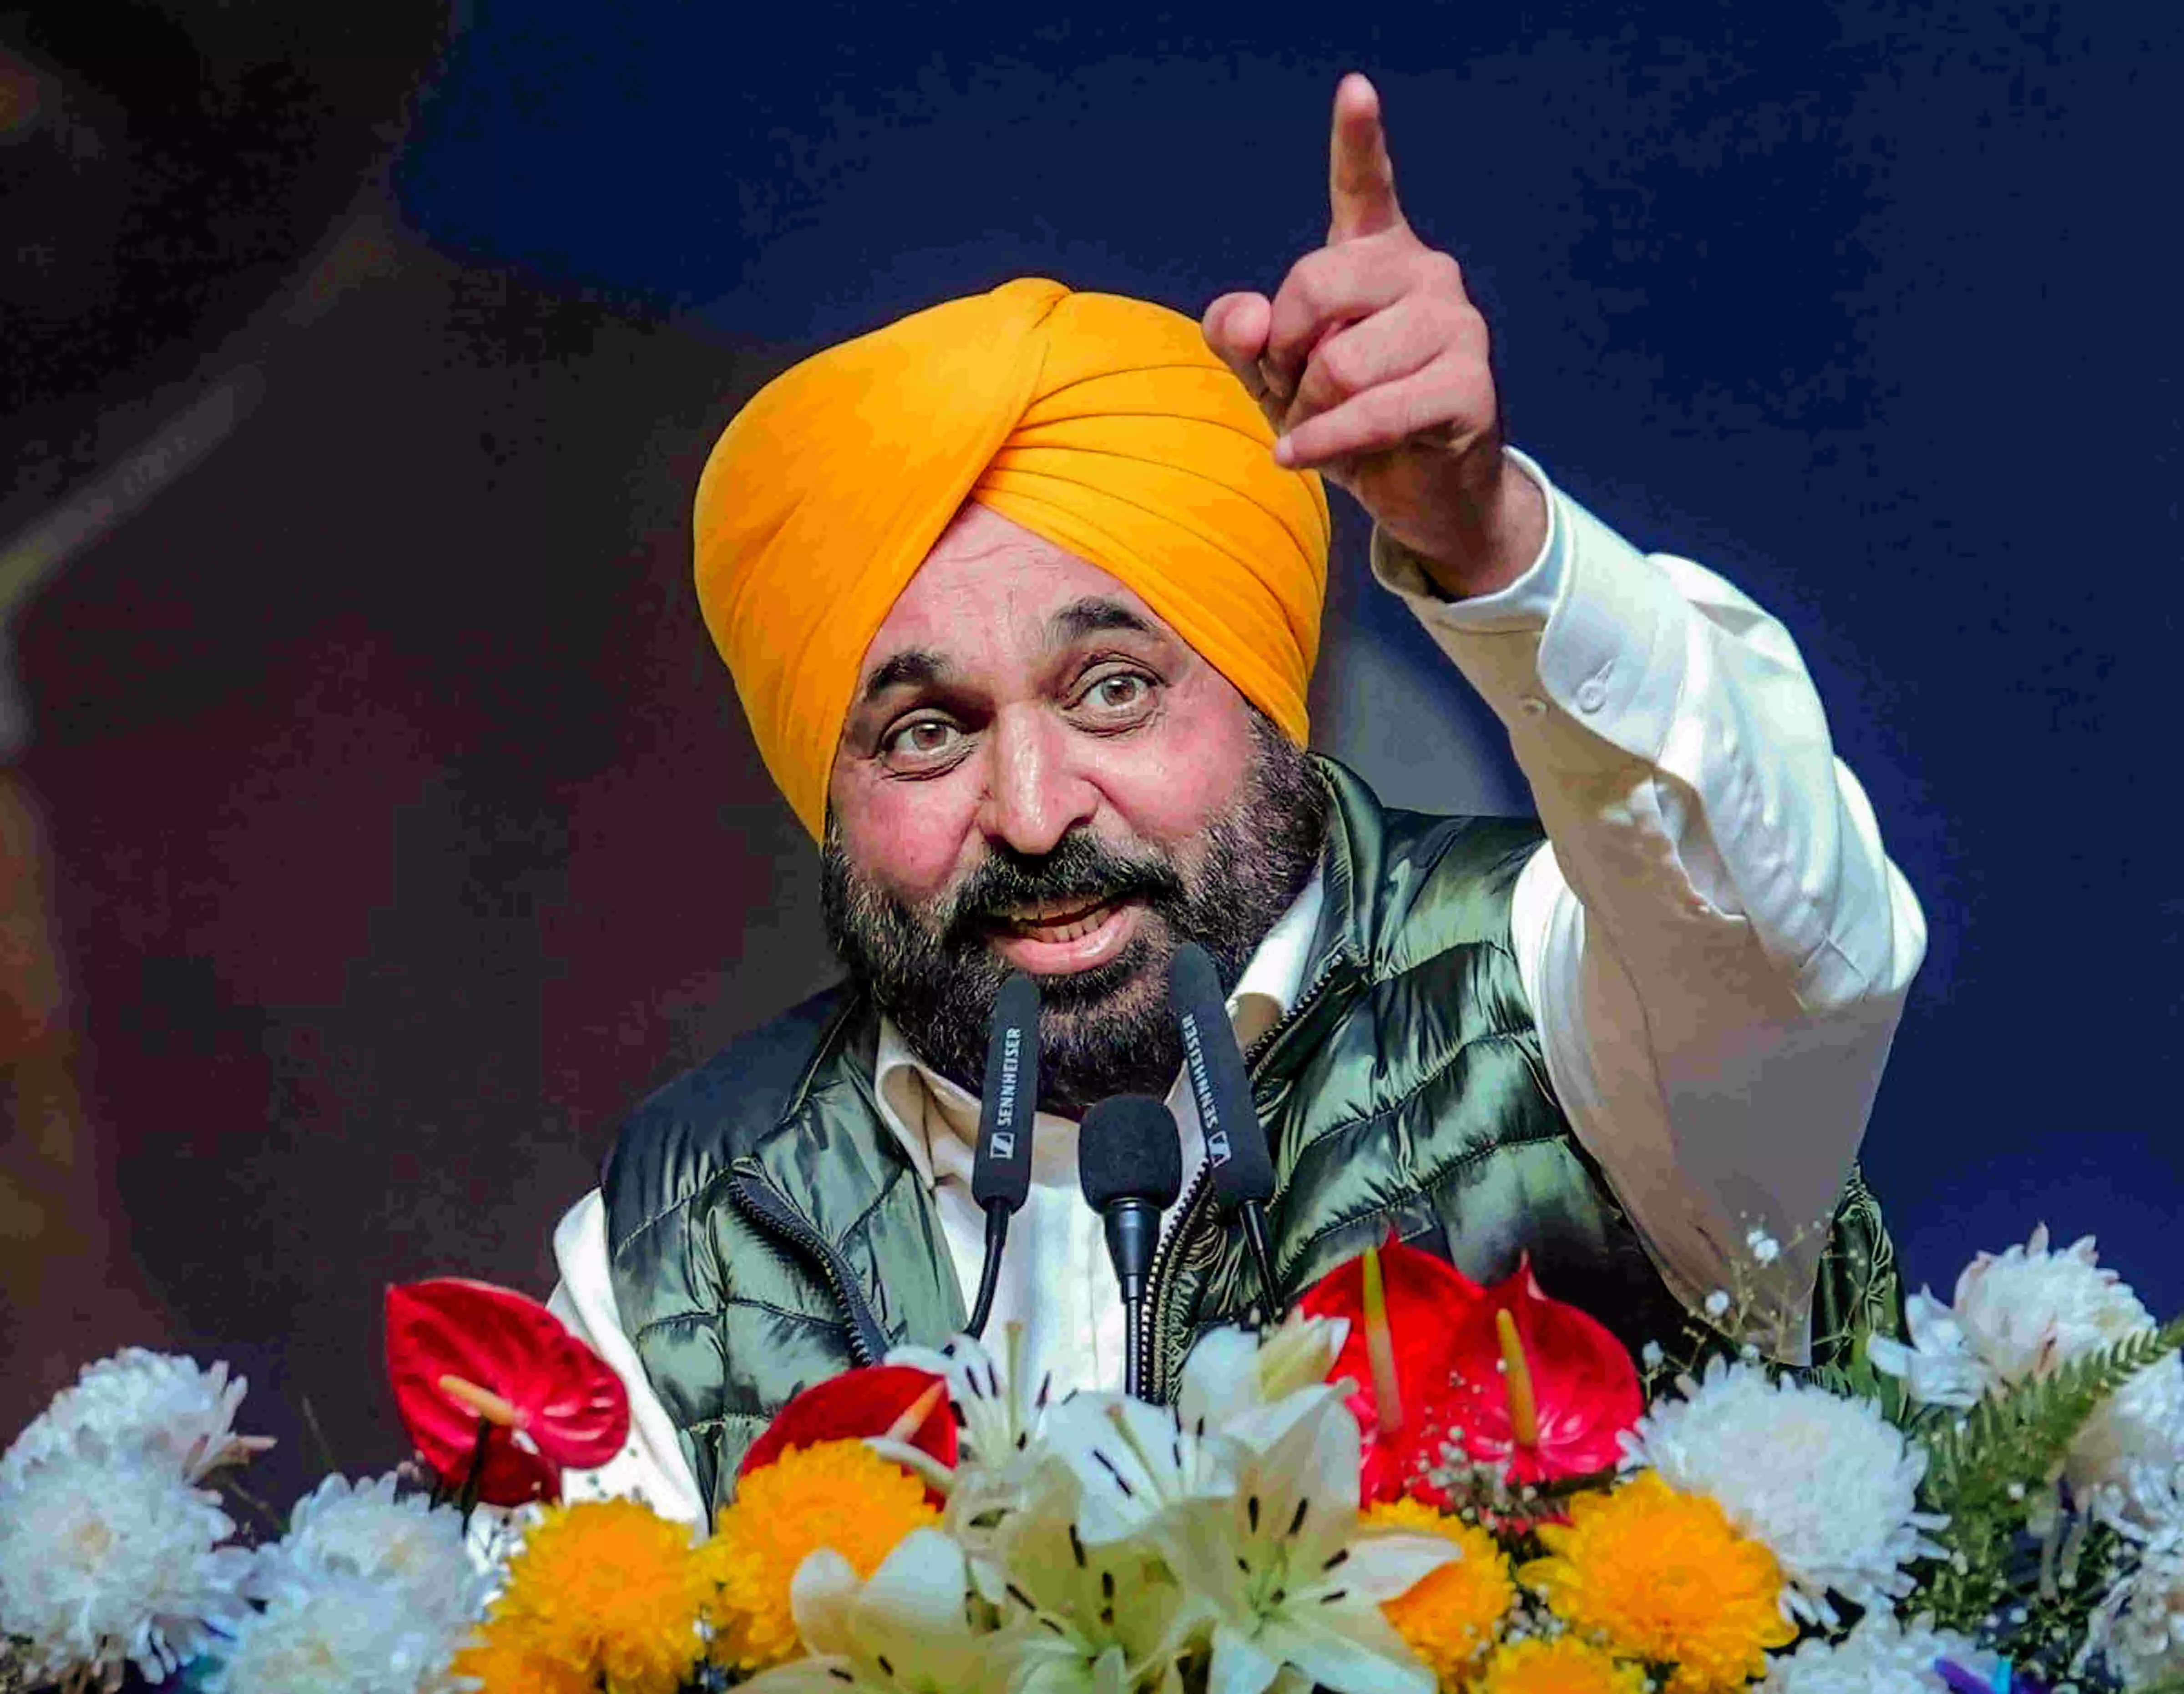 Do not create border between Punjab and India: Mann on barbed wire, nails laid by Haryana govt